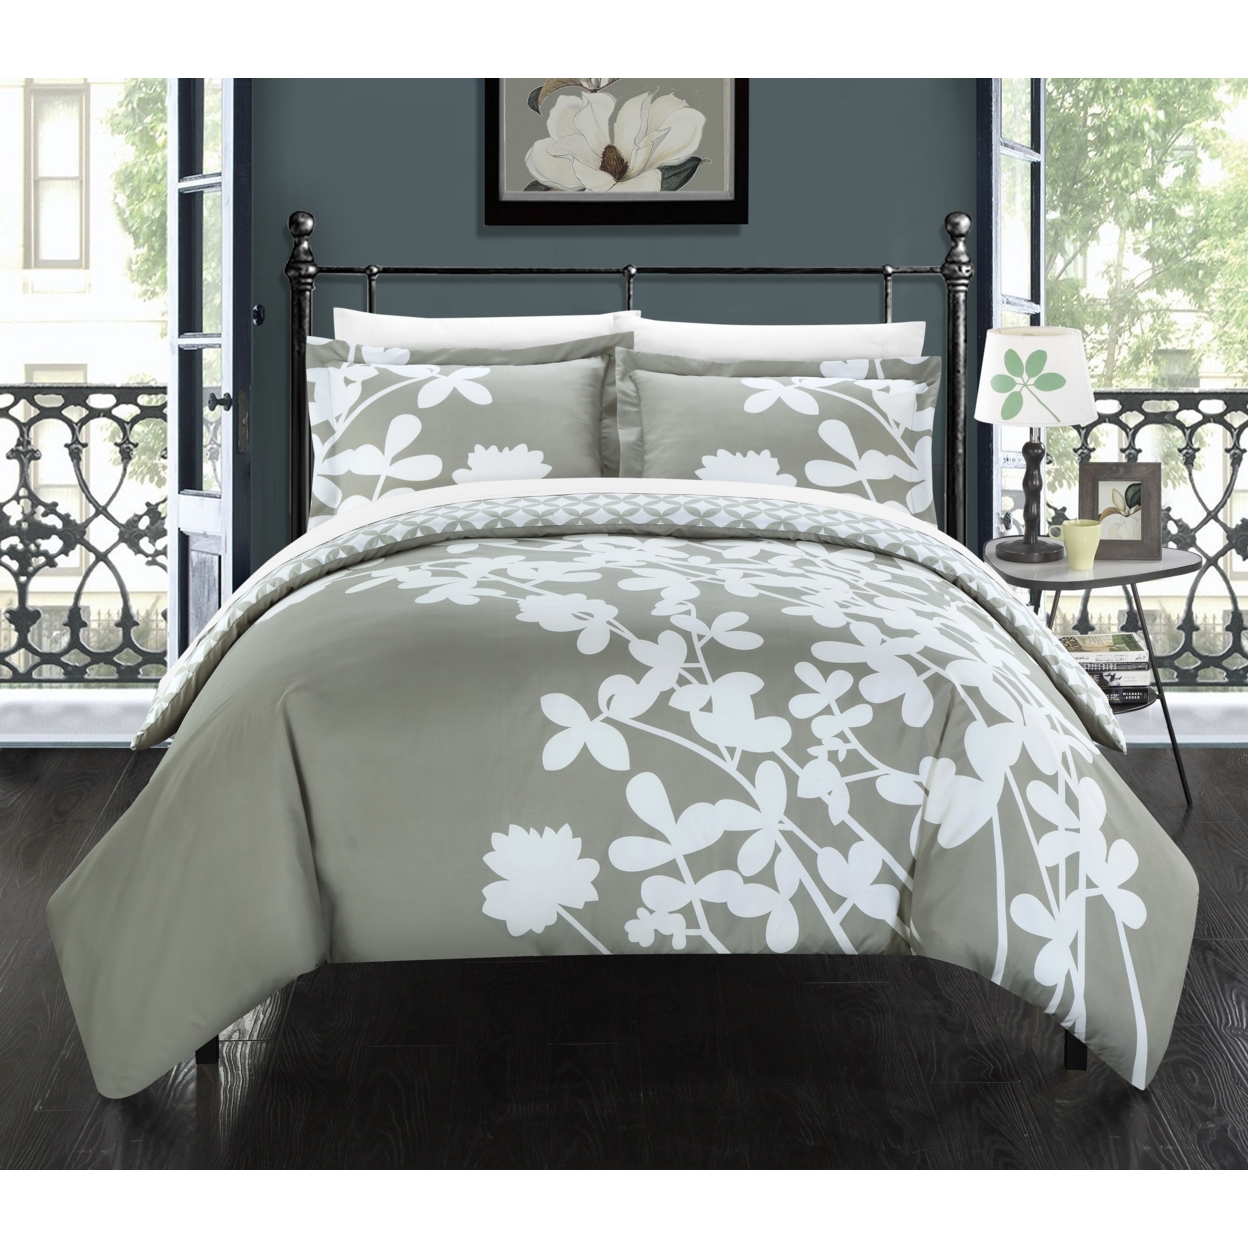 3 Piece Amaryllis Reversible Large Scale Floral Design Printed With Diamond Pattern Reverse Duvet Cover Set - Gray, King